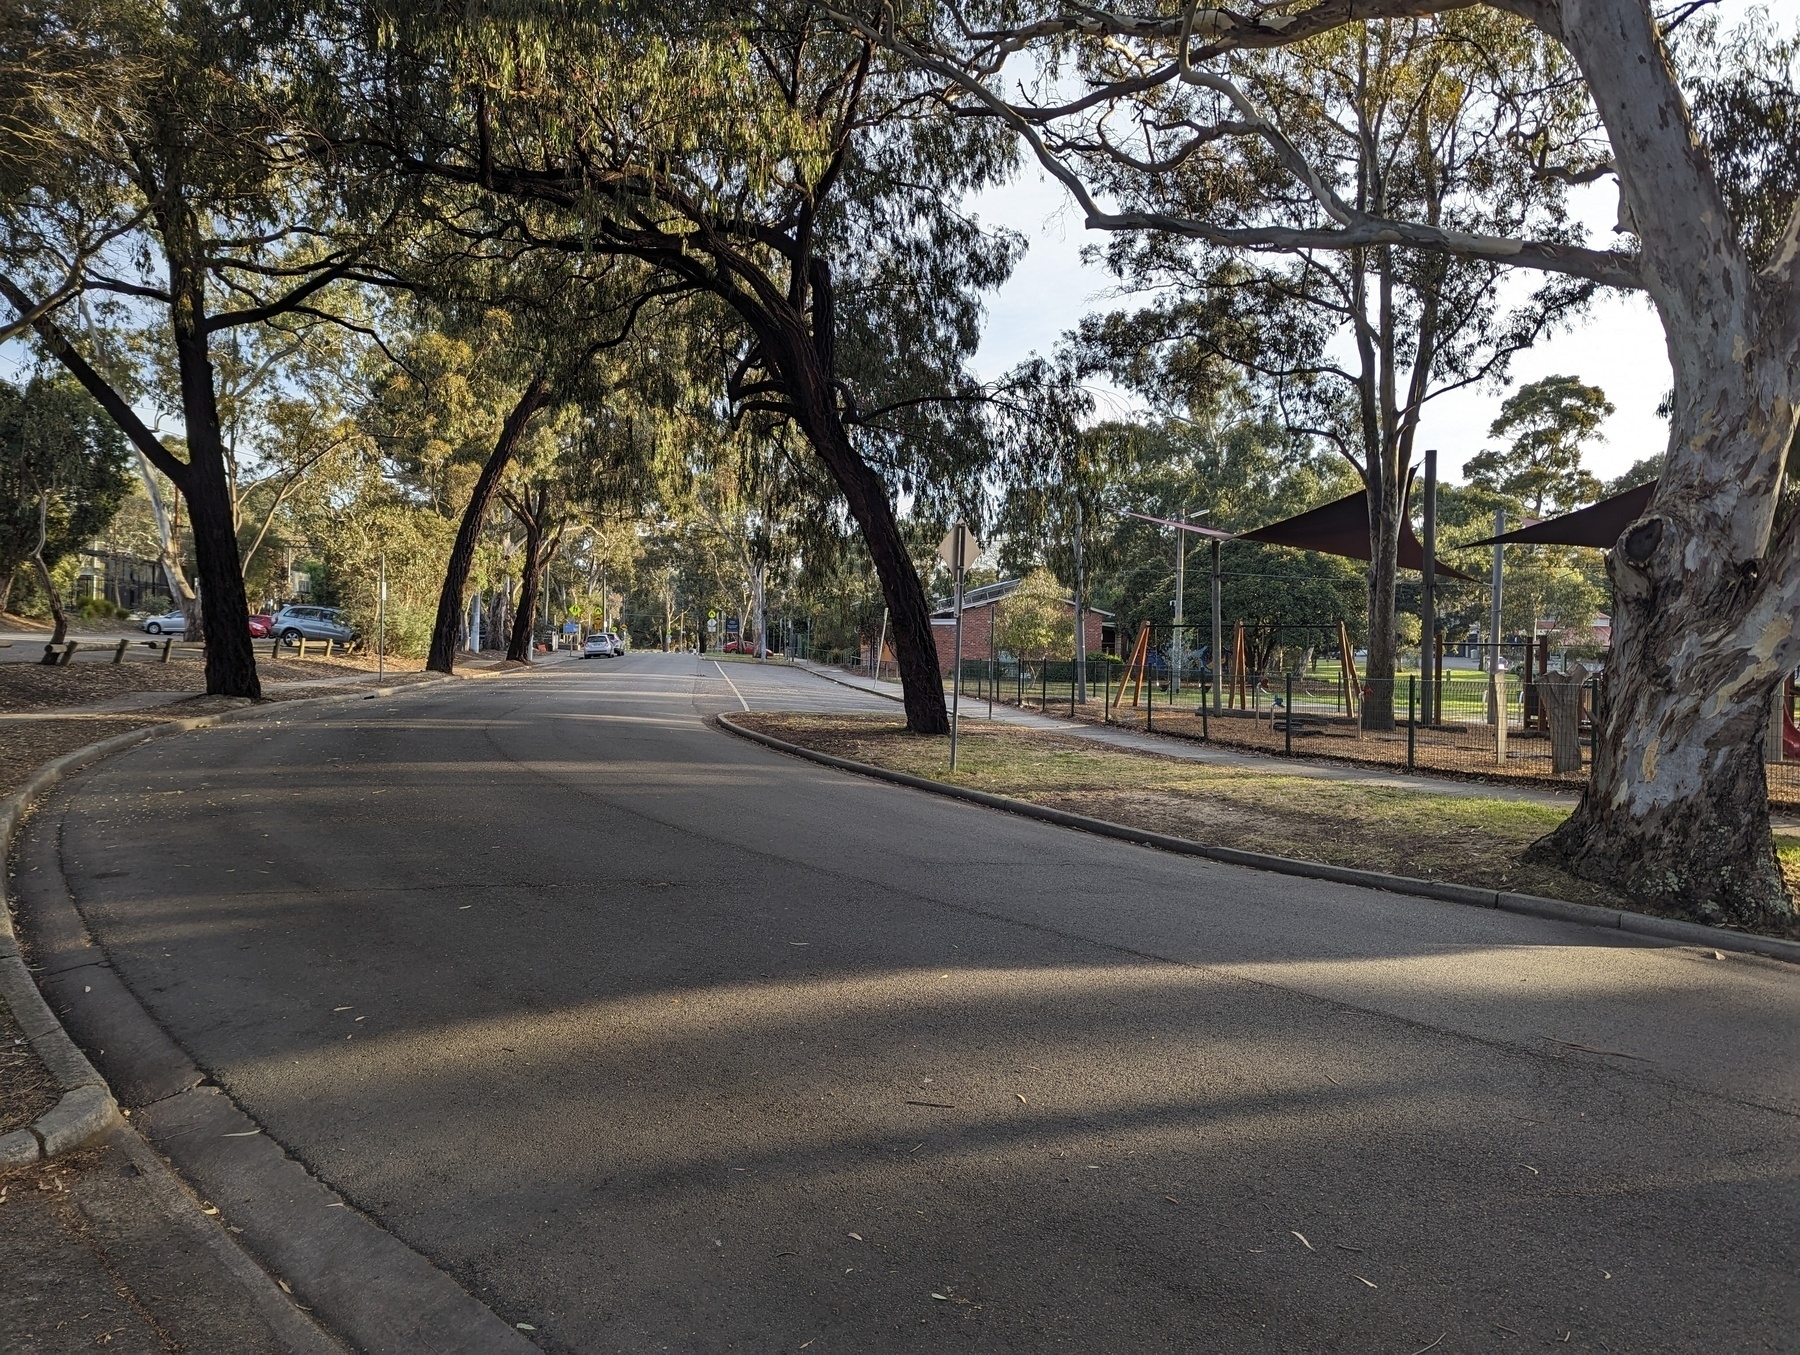 Road curving to the right, shaded by eucalyptus trees, with a playground on the right.